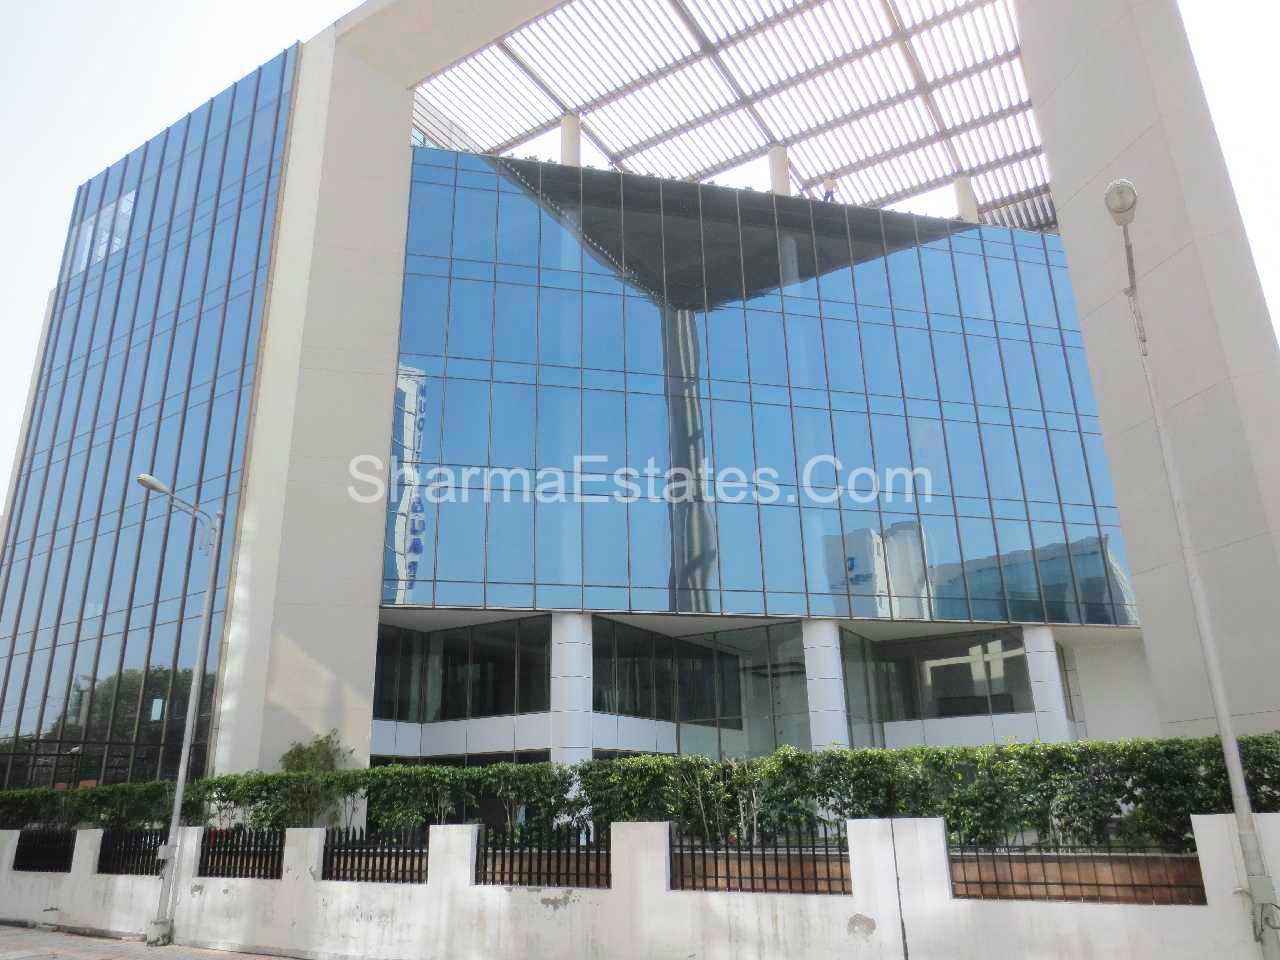 Independent Building For Sale in Qutab Institutional Area, New Delhi | 50,000 Sq.Ft. Commercial Office Space in Delhi